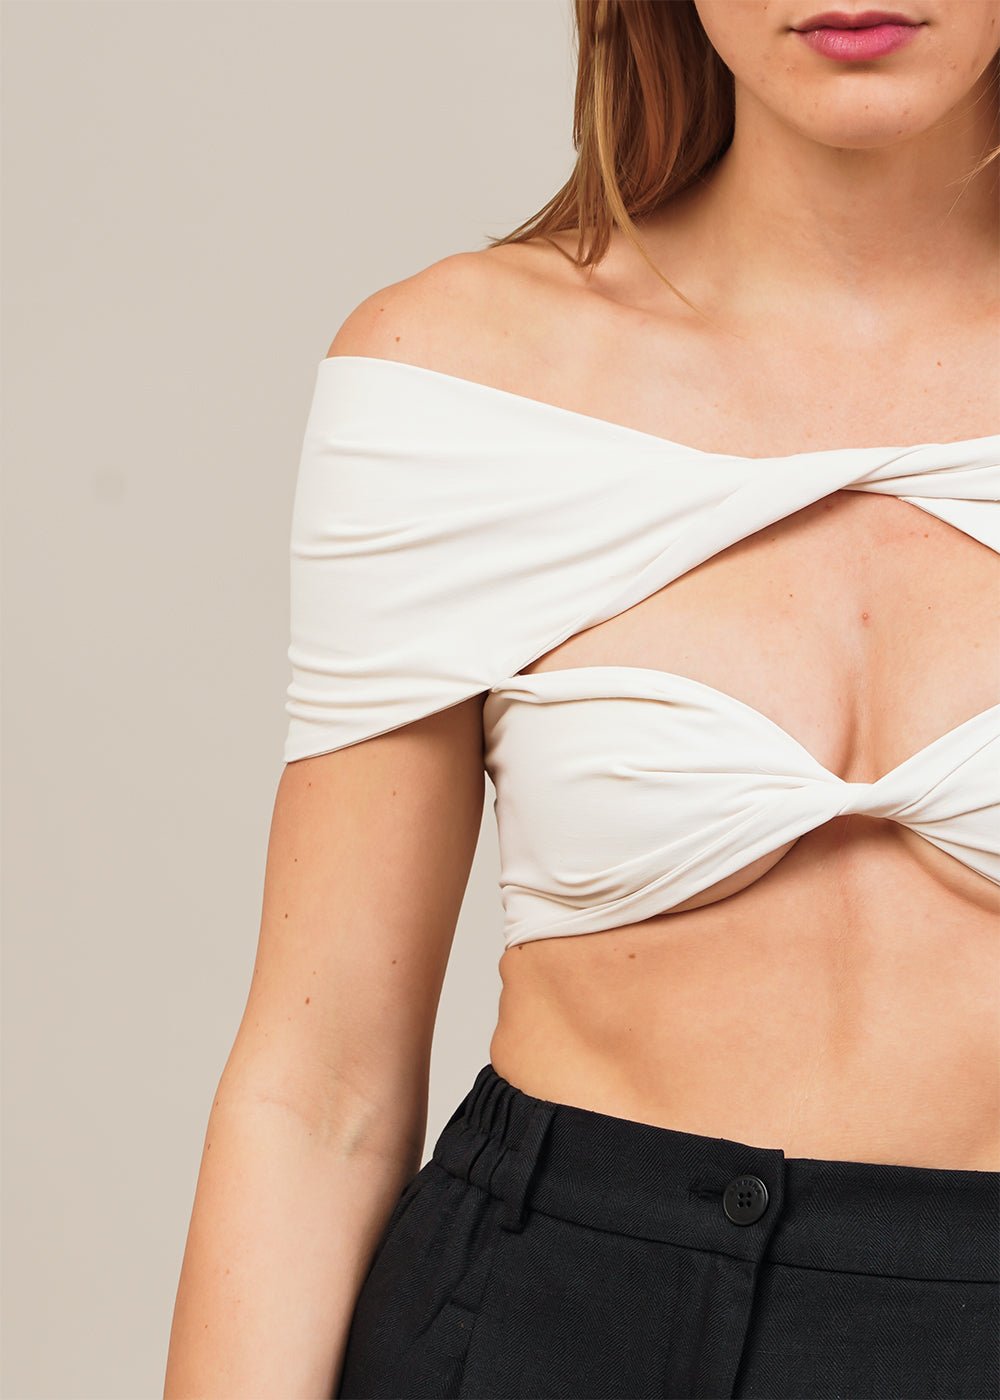 Modern Weaving Coconut Double Bandeau Top - New Classics Studios Sustainable Ethical Fashion Canada